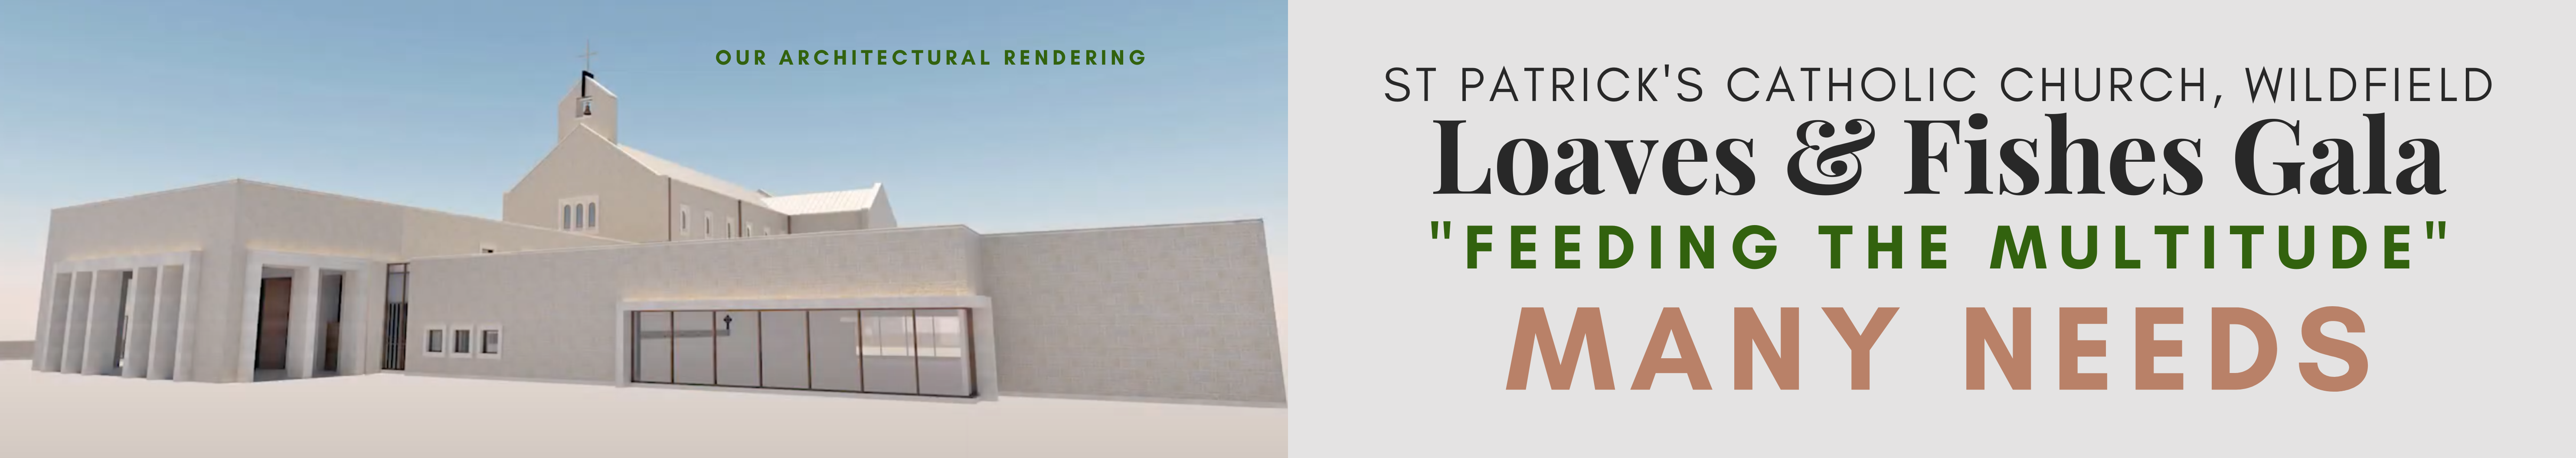 baner with the theme of many needs, with image of the rendering of our new church